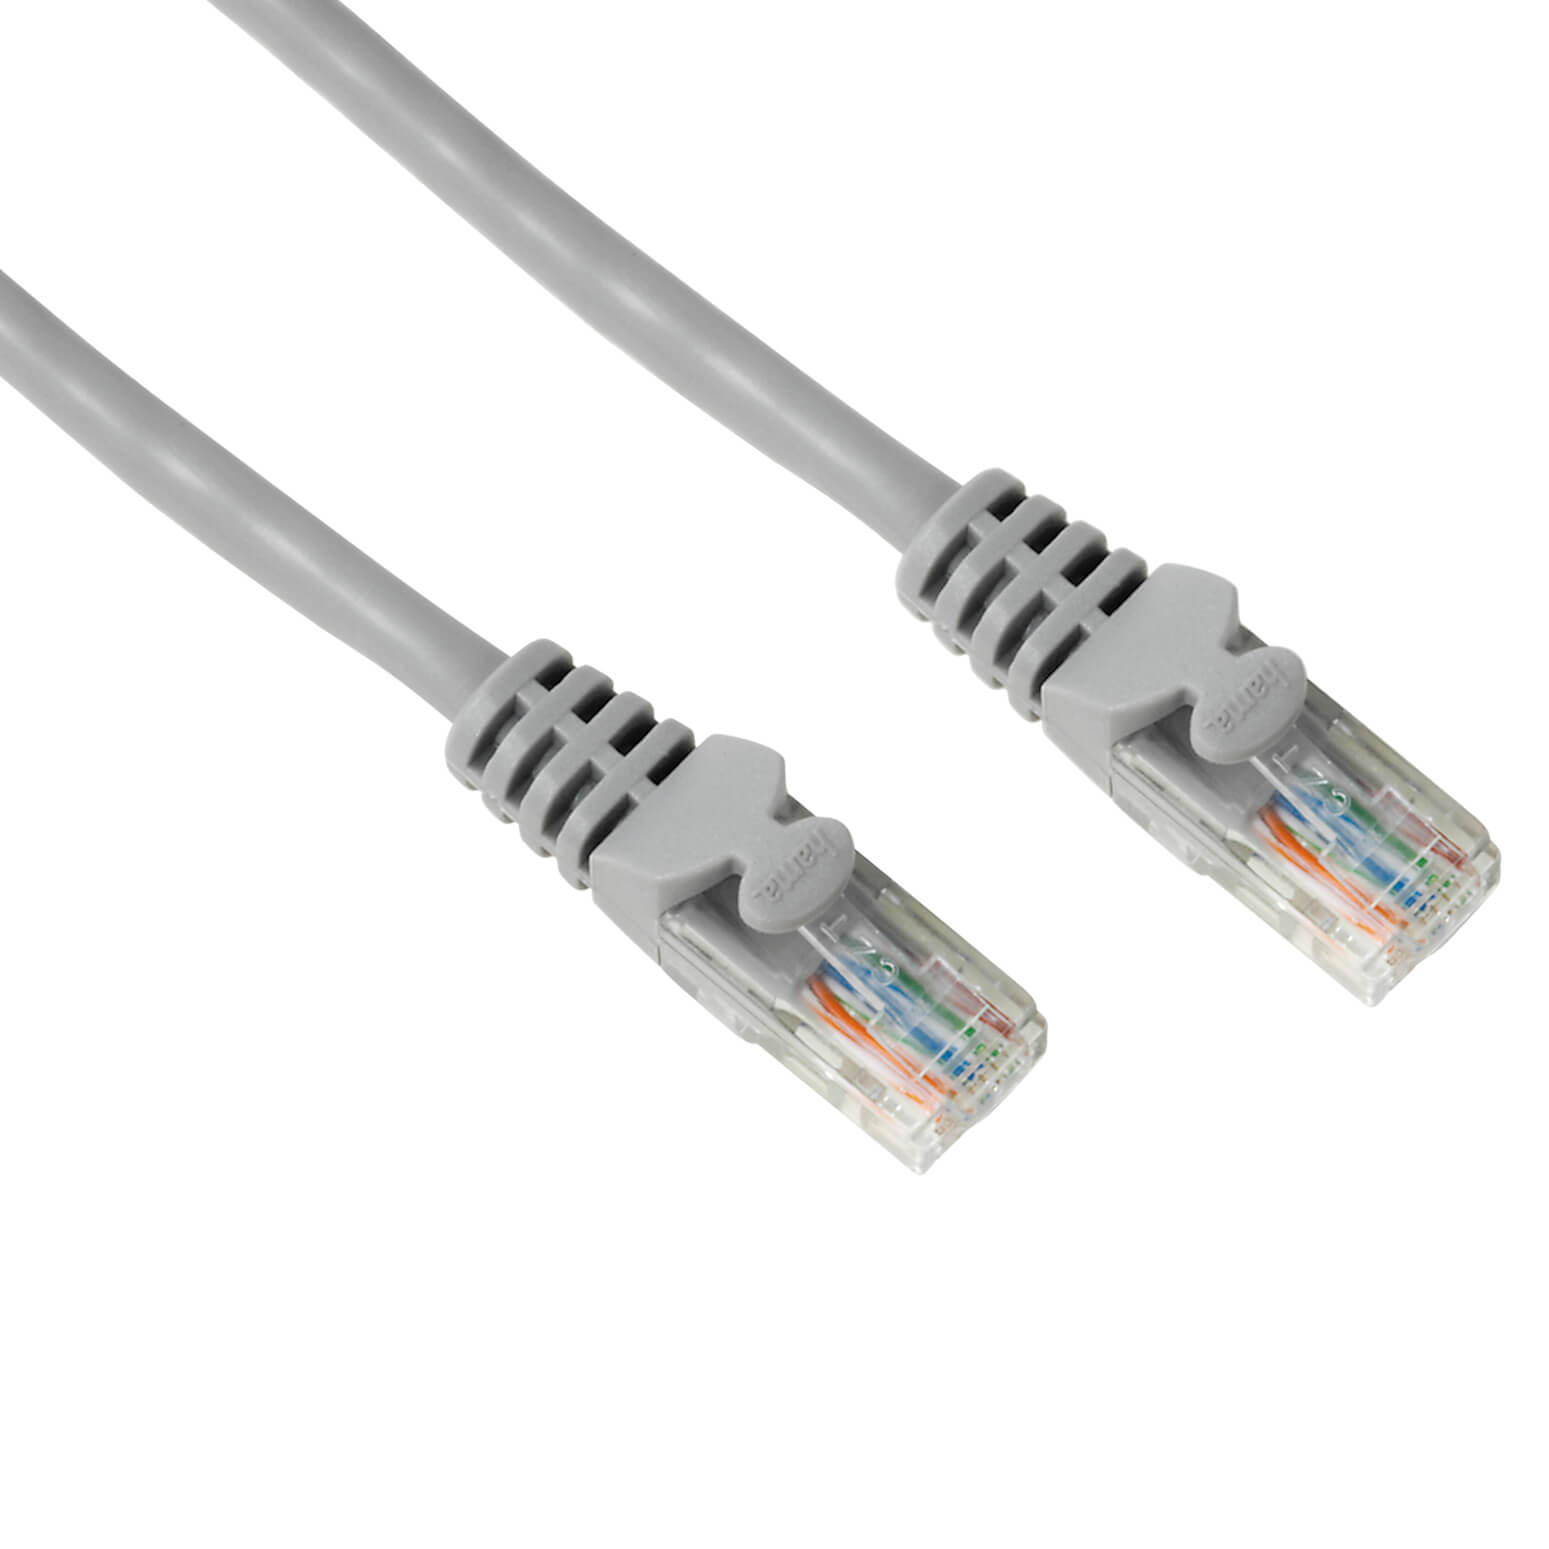 CAT 5e Network Cable UTP, gre y, 10.00 m